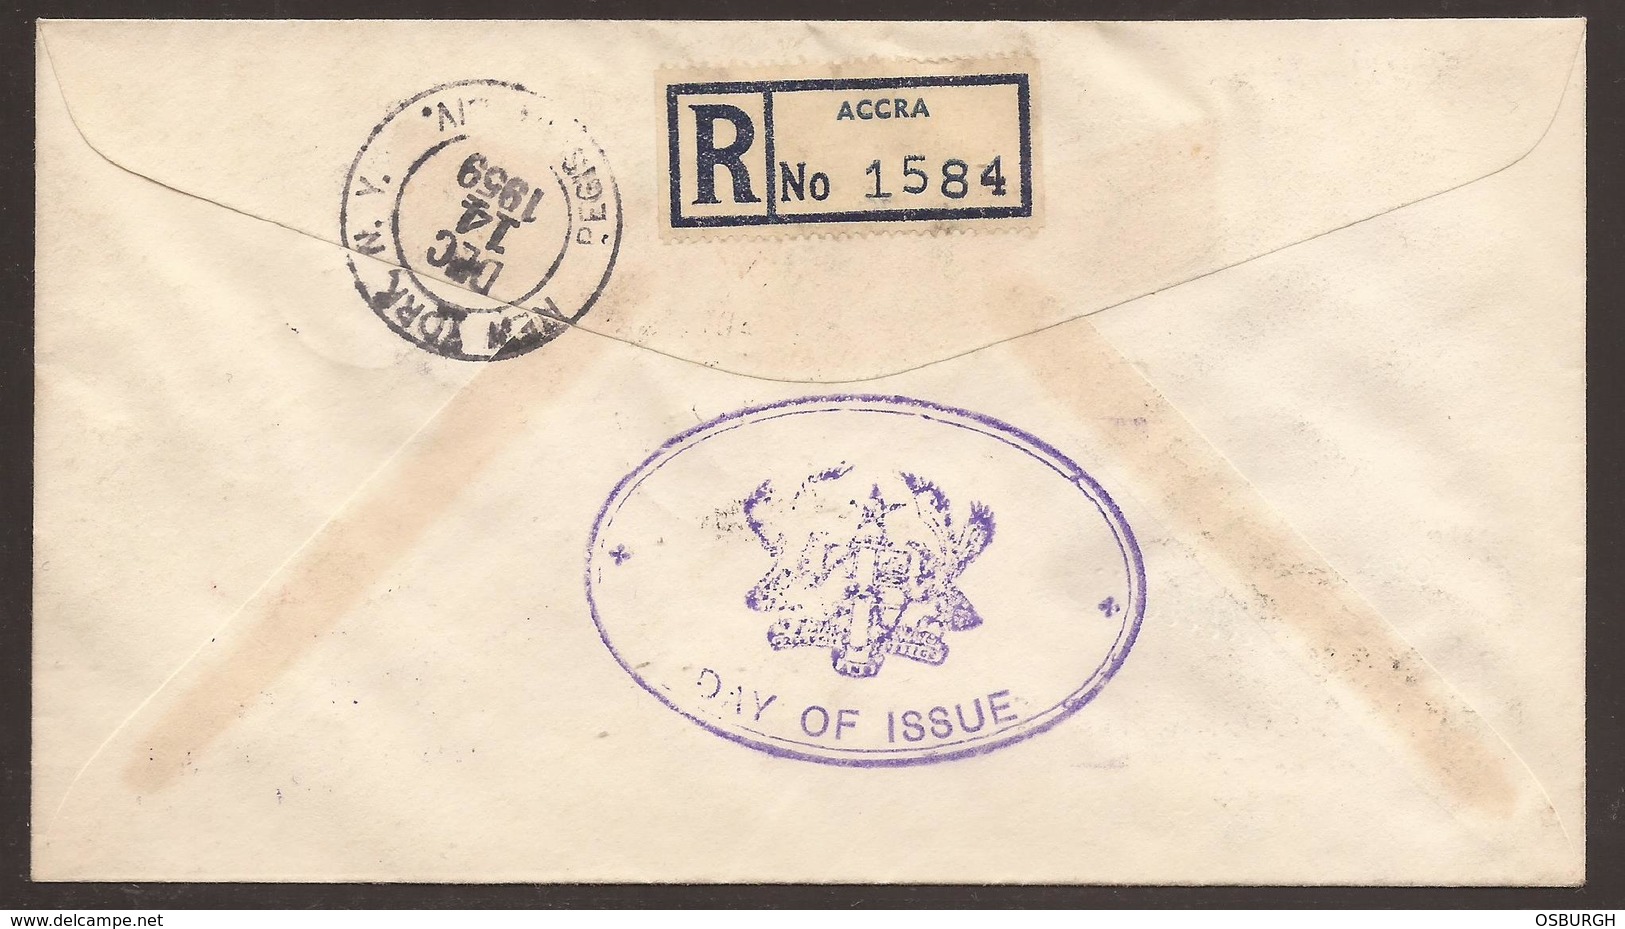 GHANA. 1959. UN SET. REGISTERED FIRST DAY AIR MAIL COVER. - Ghana (1957-...)